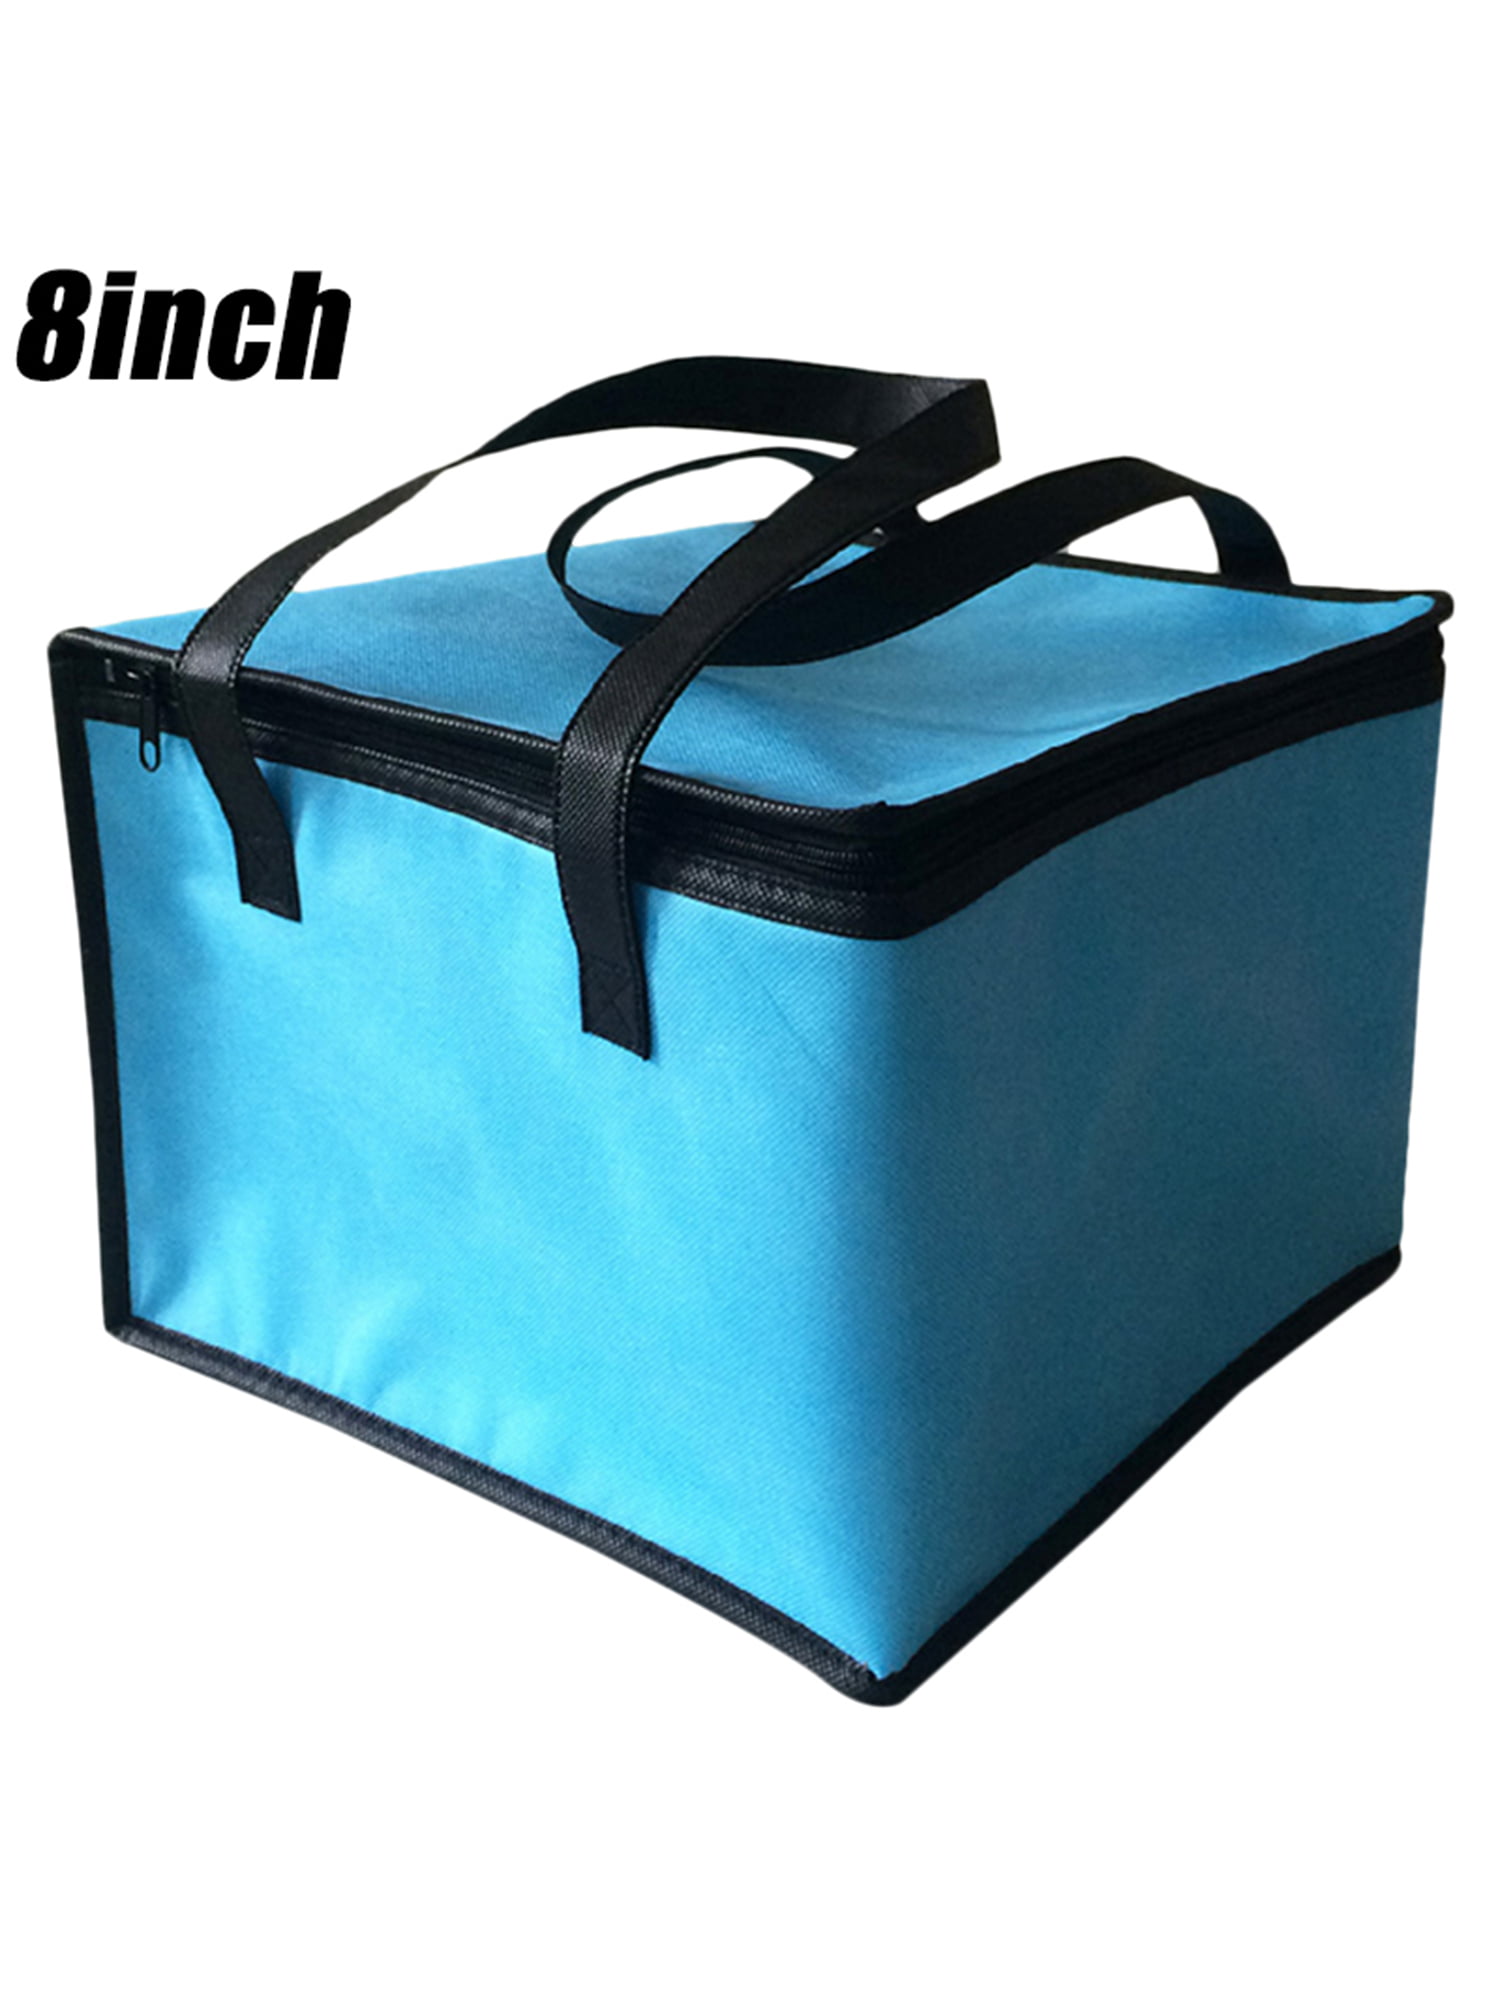 Details about   Thermal Insulated Lunch Box Cooler Bag Picnic Cooler Storage EDC Outdoor Travel 